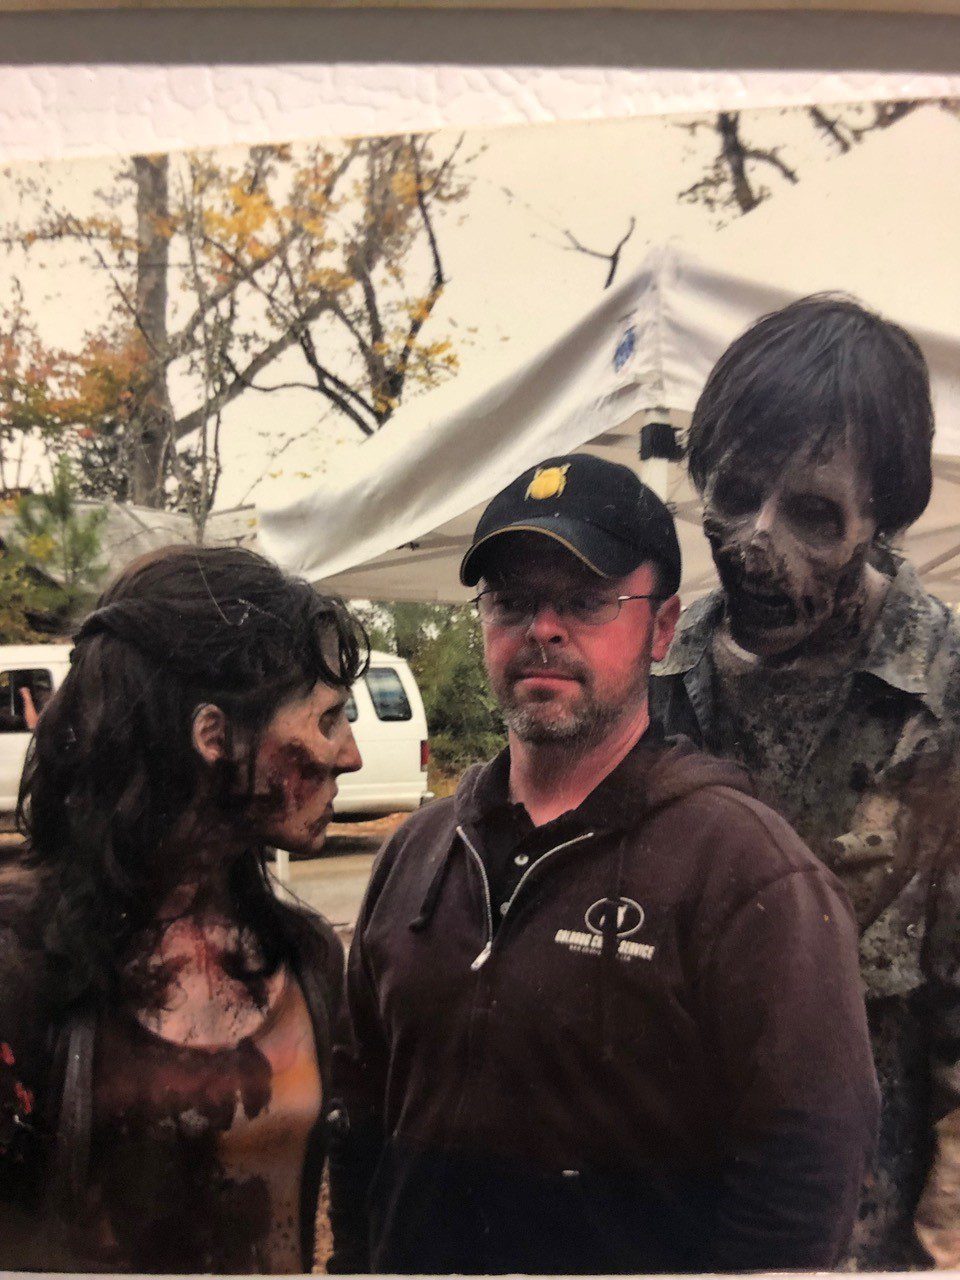 A man and two women dressed as zombies.